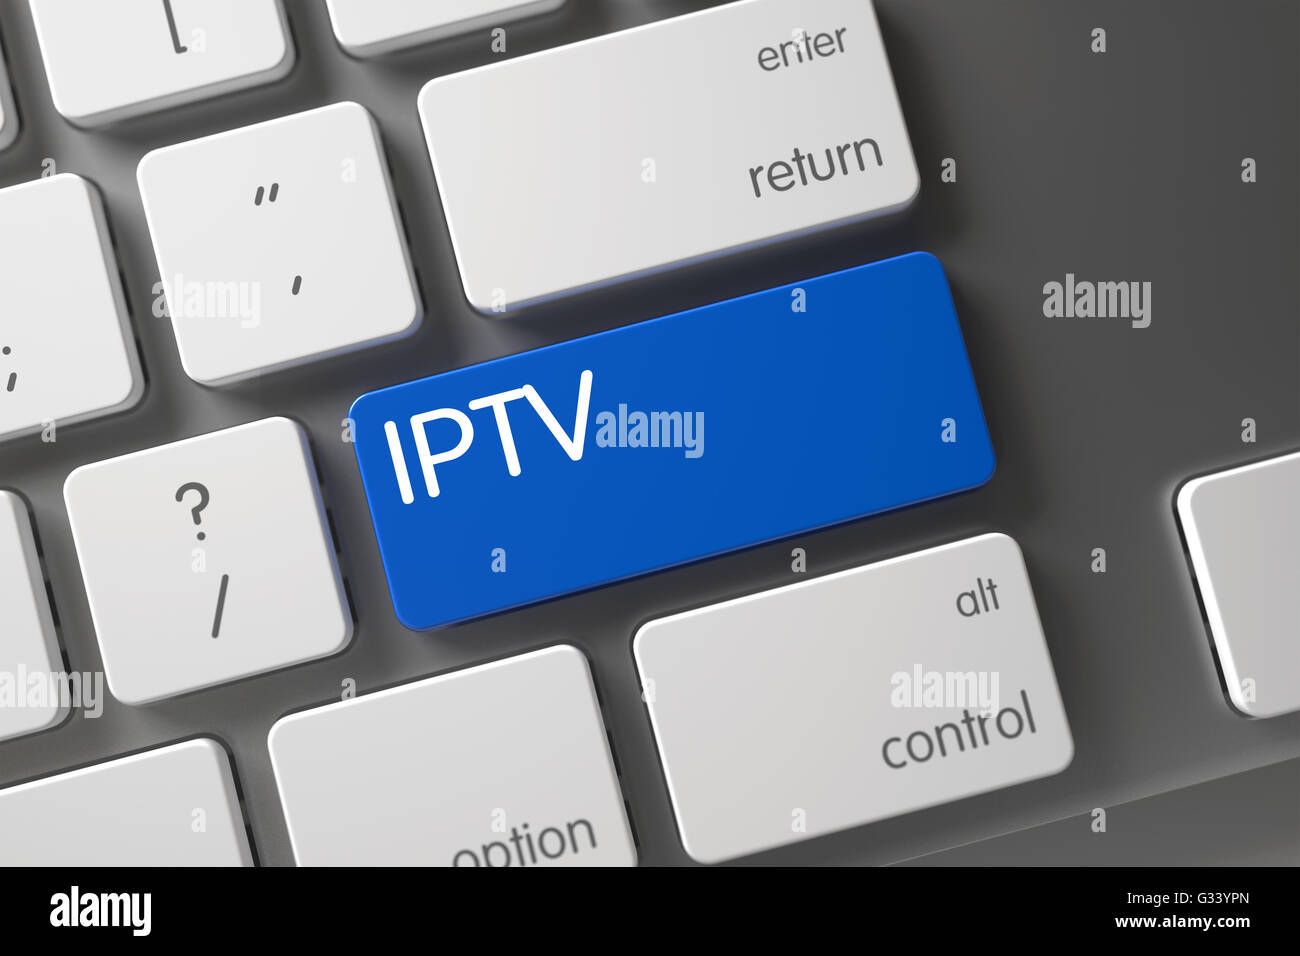 Keyboard with Blue Button - Iptv. Stock Photo